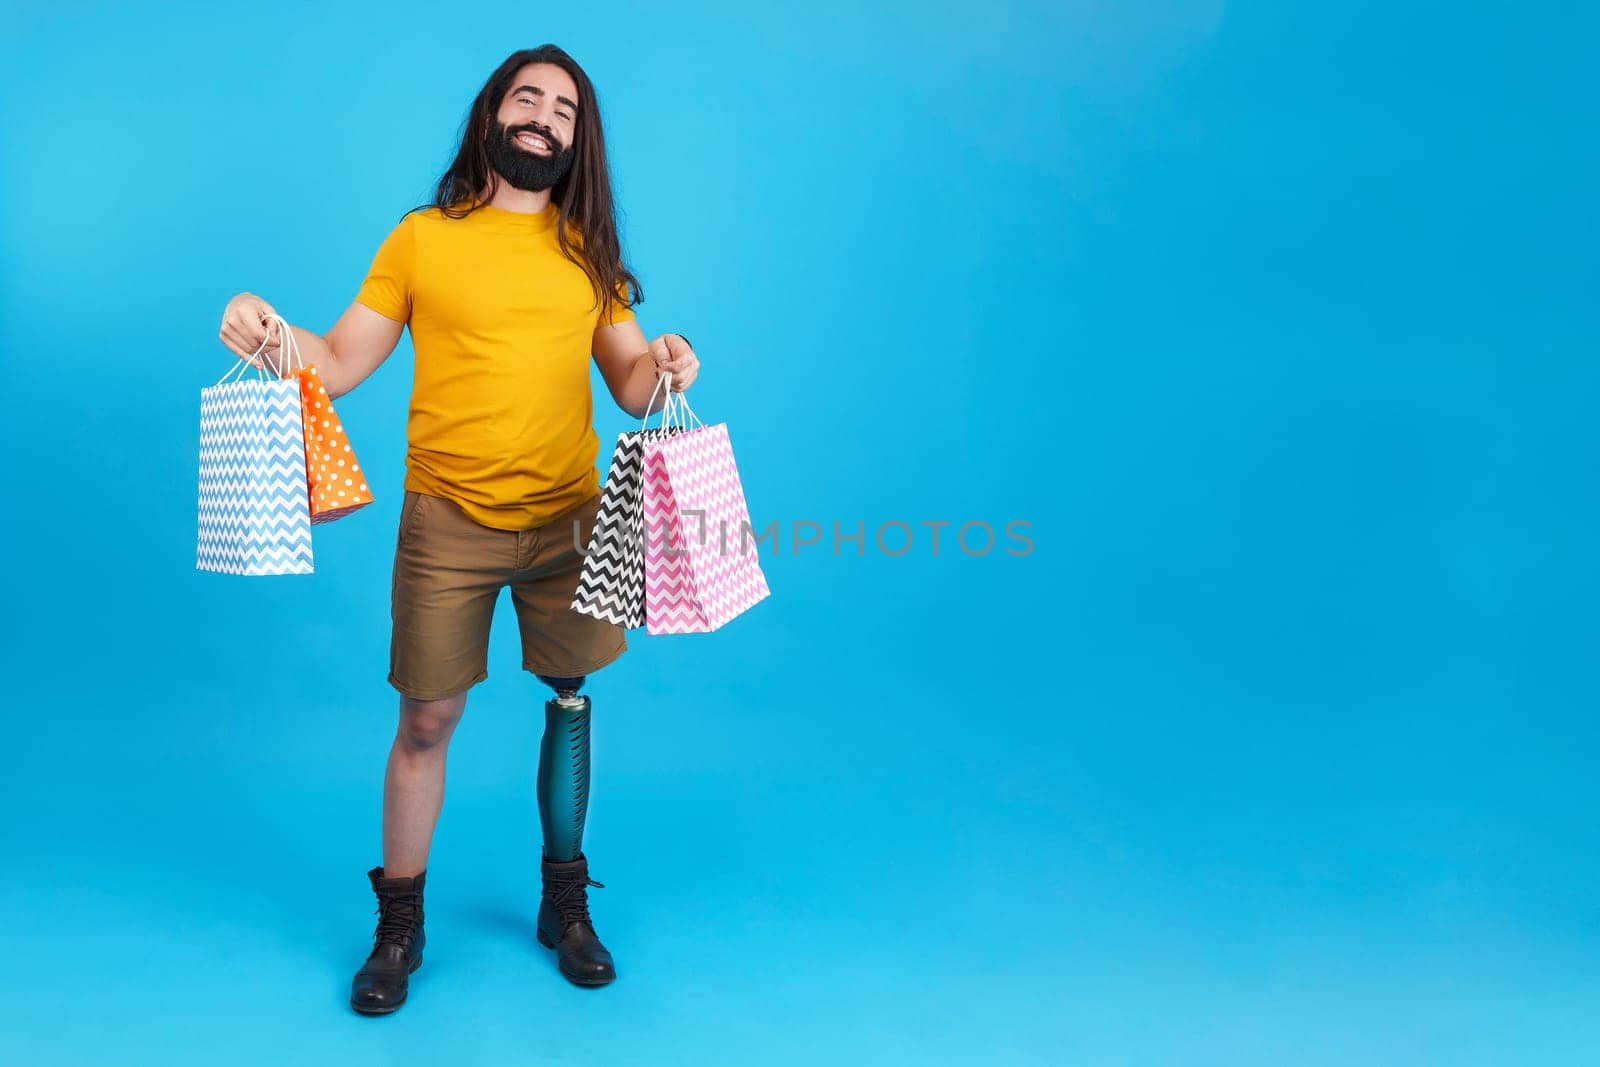 Smiling man with prosthetic leg holing many shopping bags by ivanmoreno